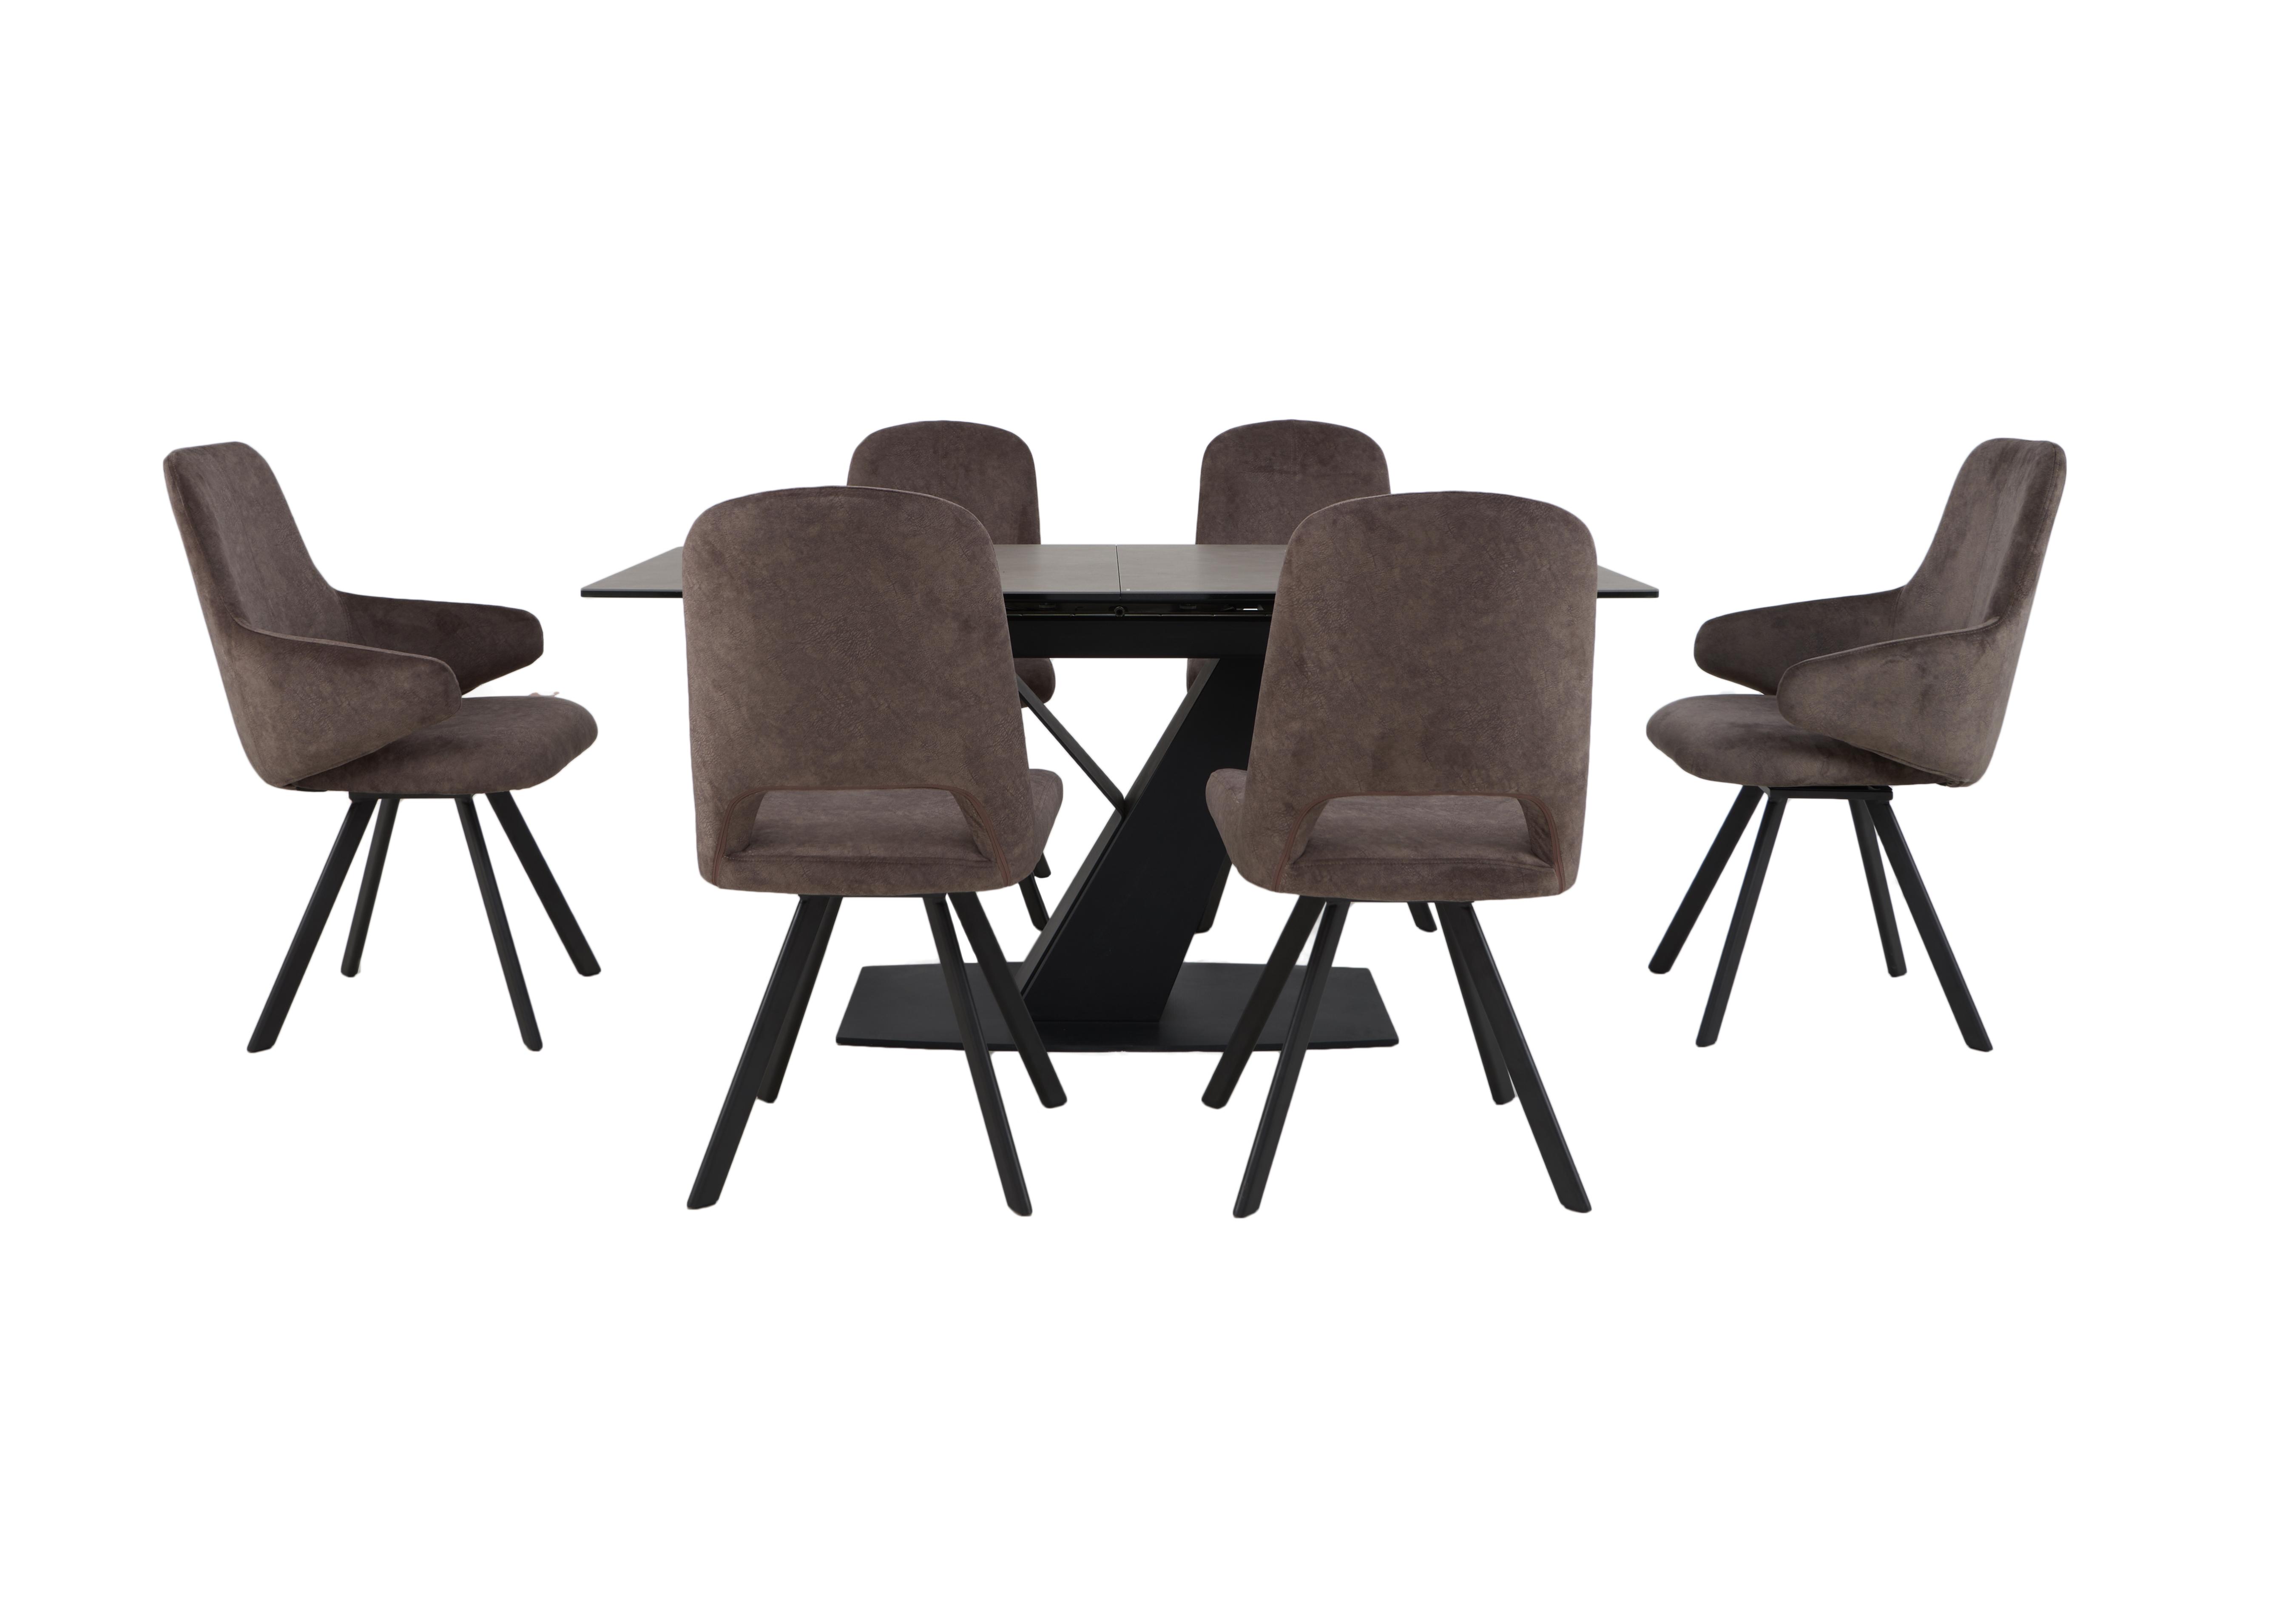 Enterprise Dining Table, 4 Swivel Side Chairs and 2 Swivel Arm Chairs Dining Set in  on Furniture Village